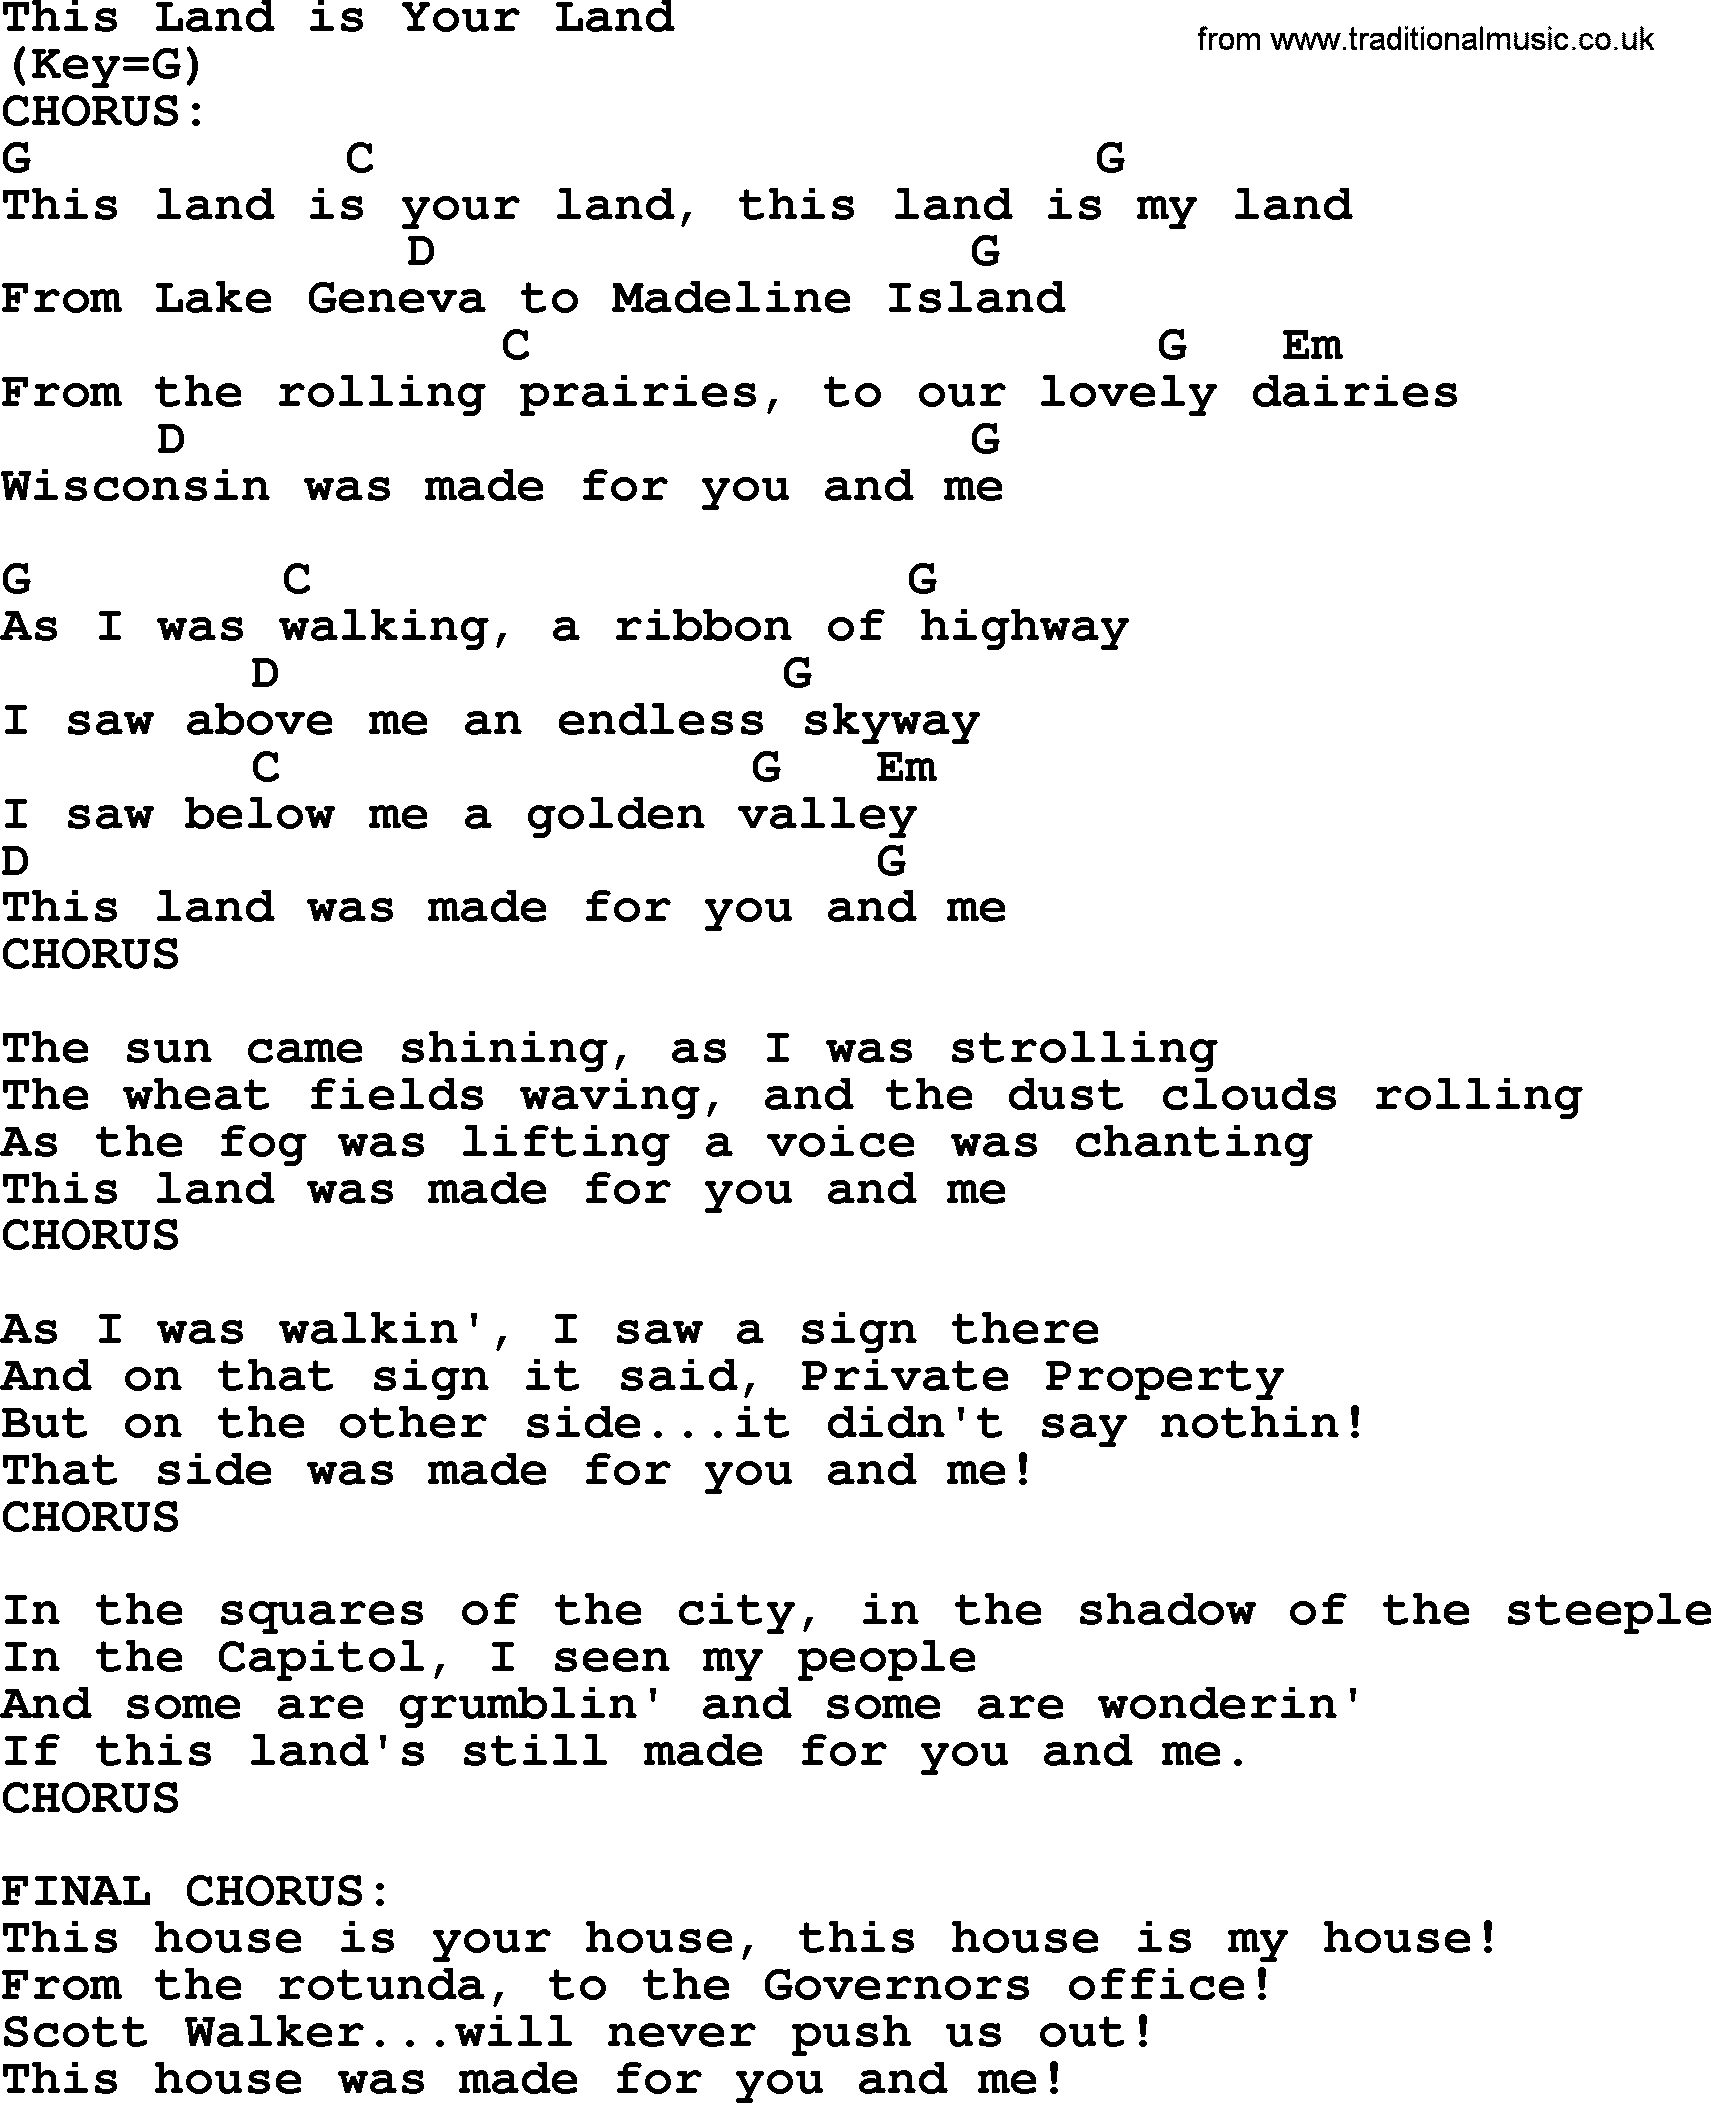 Political, Solidarity, Workers or Union song: This Land Is Your Land, lyrics and chords